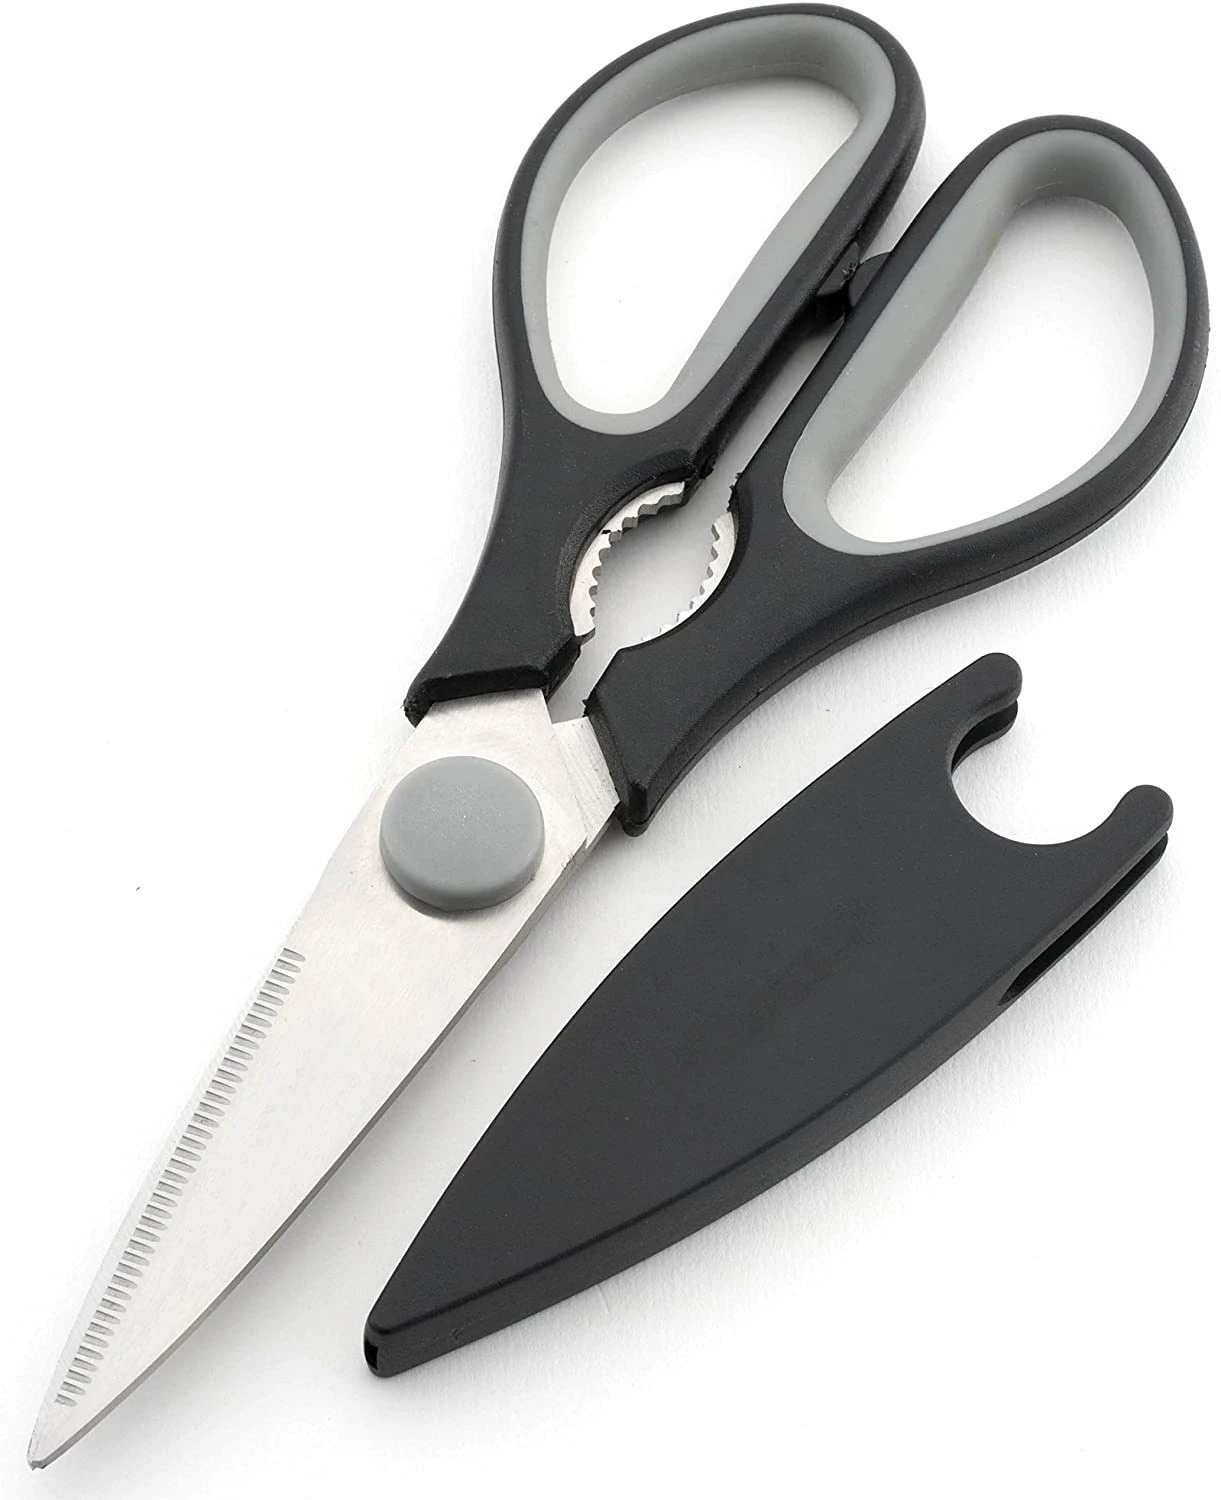 Kitchen Shears with Blade Cover, Stainless Steel Scissors for Herbs, Chicken, Meat &amp; Vegetables, Black